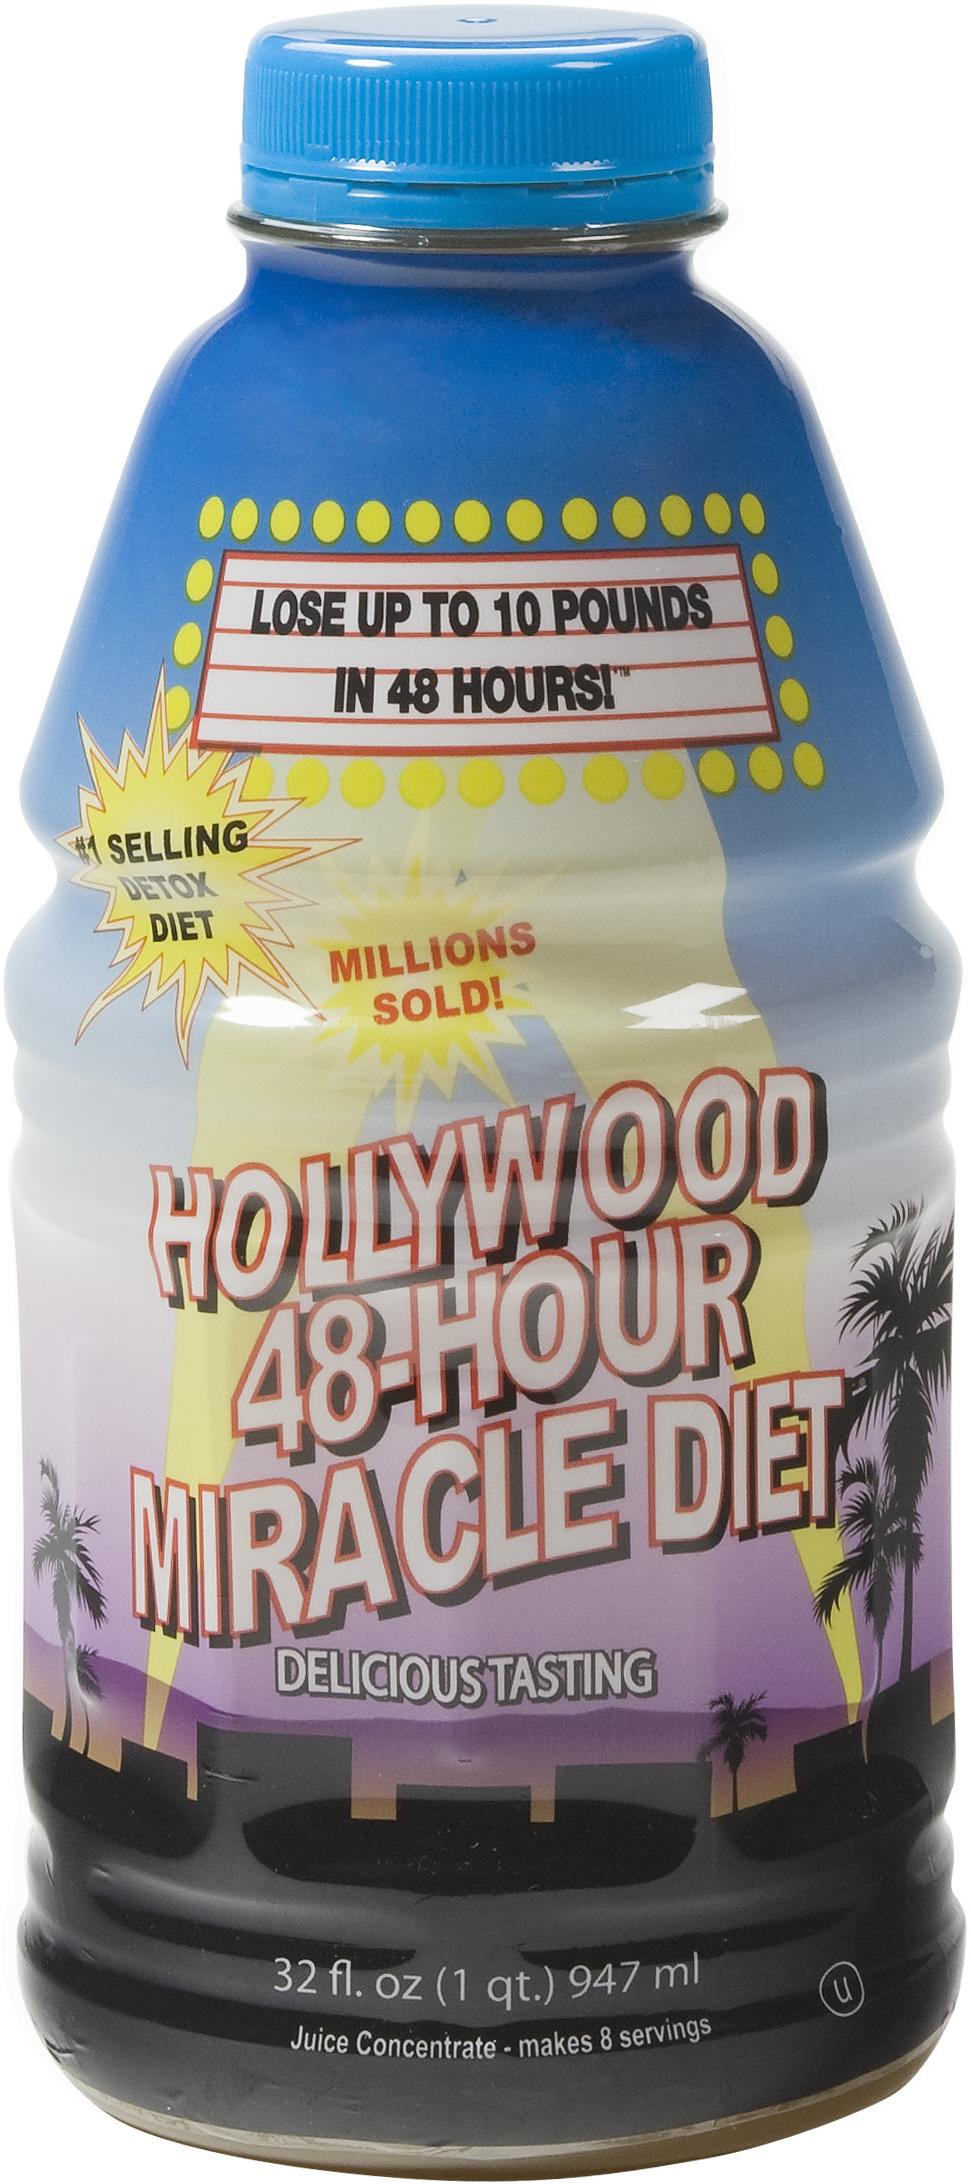 Hollywood 48-Hour Miracle Diet